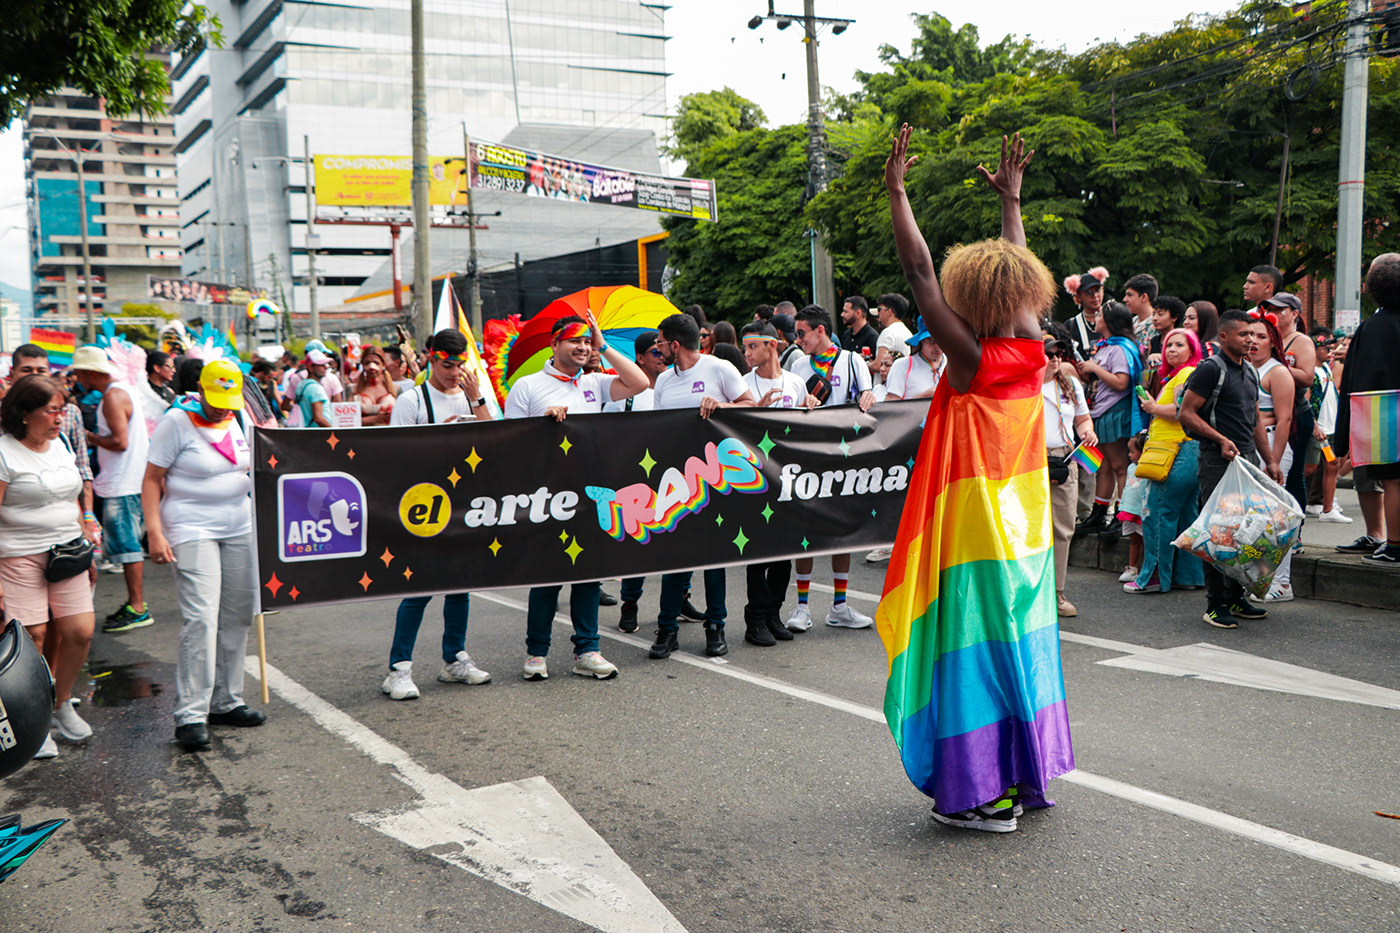 pride medellin pridemonth summer Events event photography Love loveislove LatinAmerica colombia LGBT Global parade queer transgender gay lesbian rainbow june lgbtpride storytelling   Photography  photographer Street people Gender